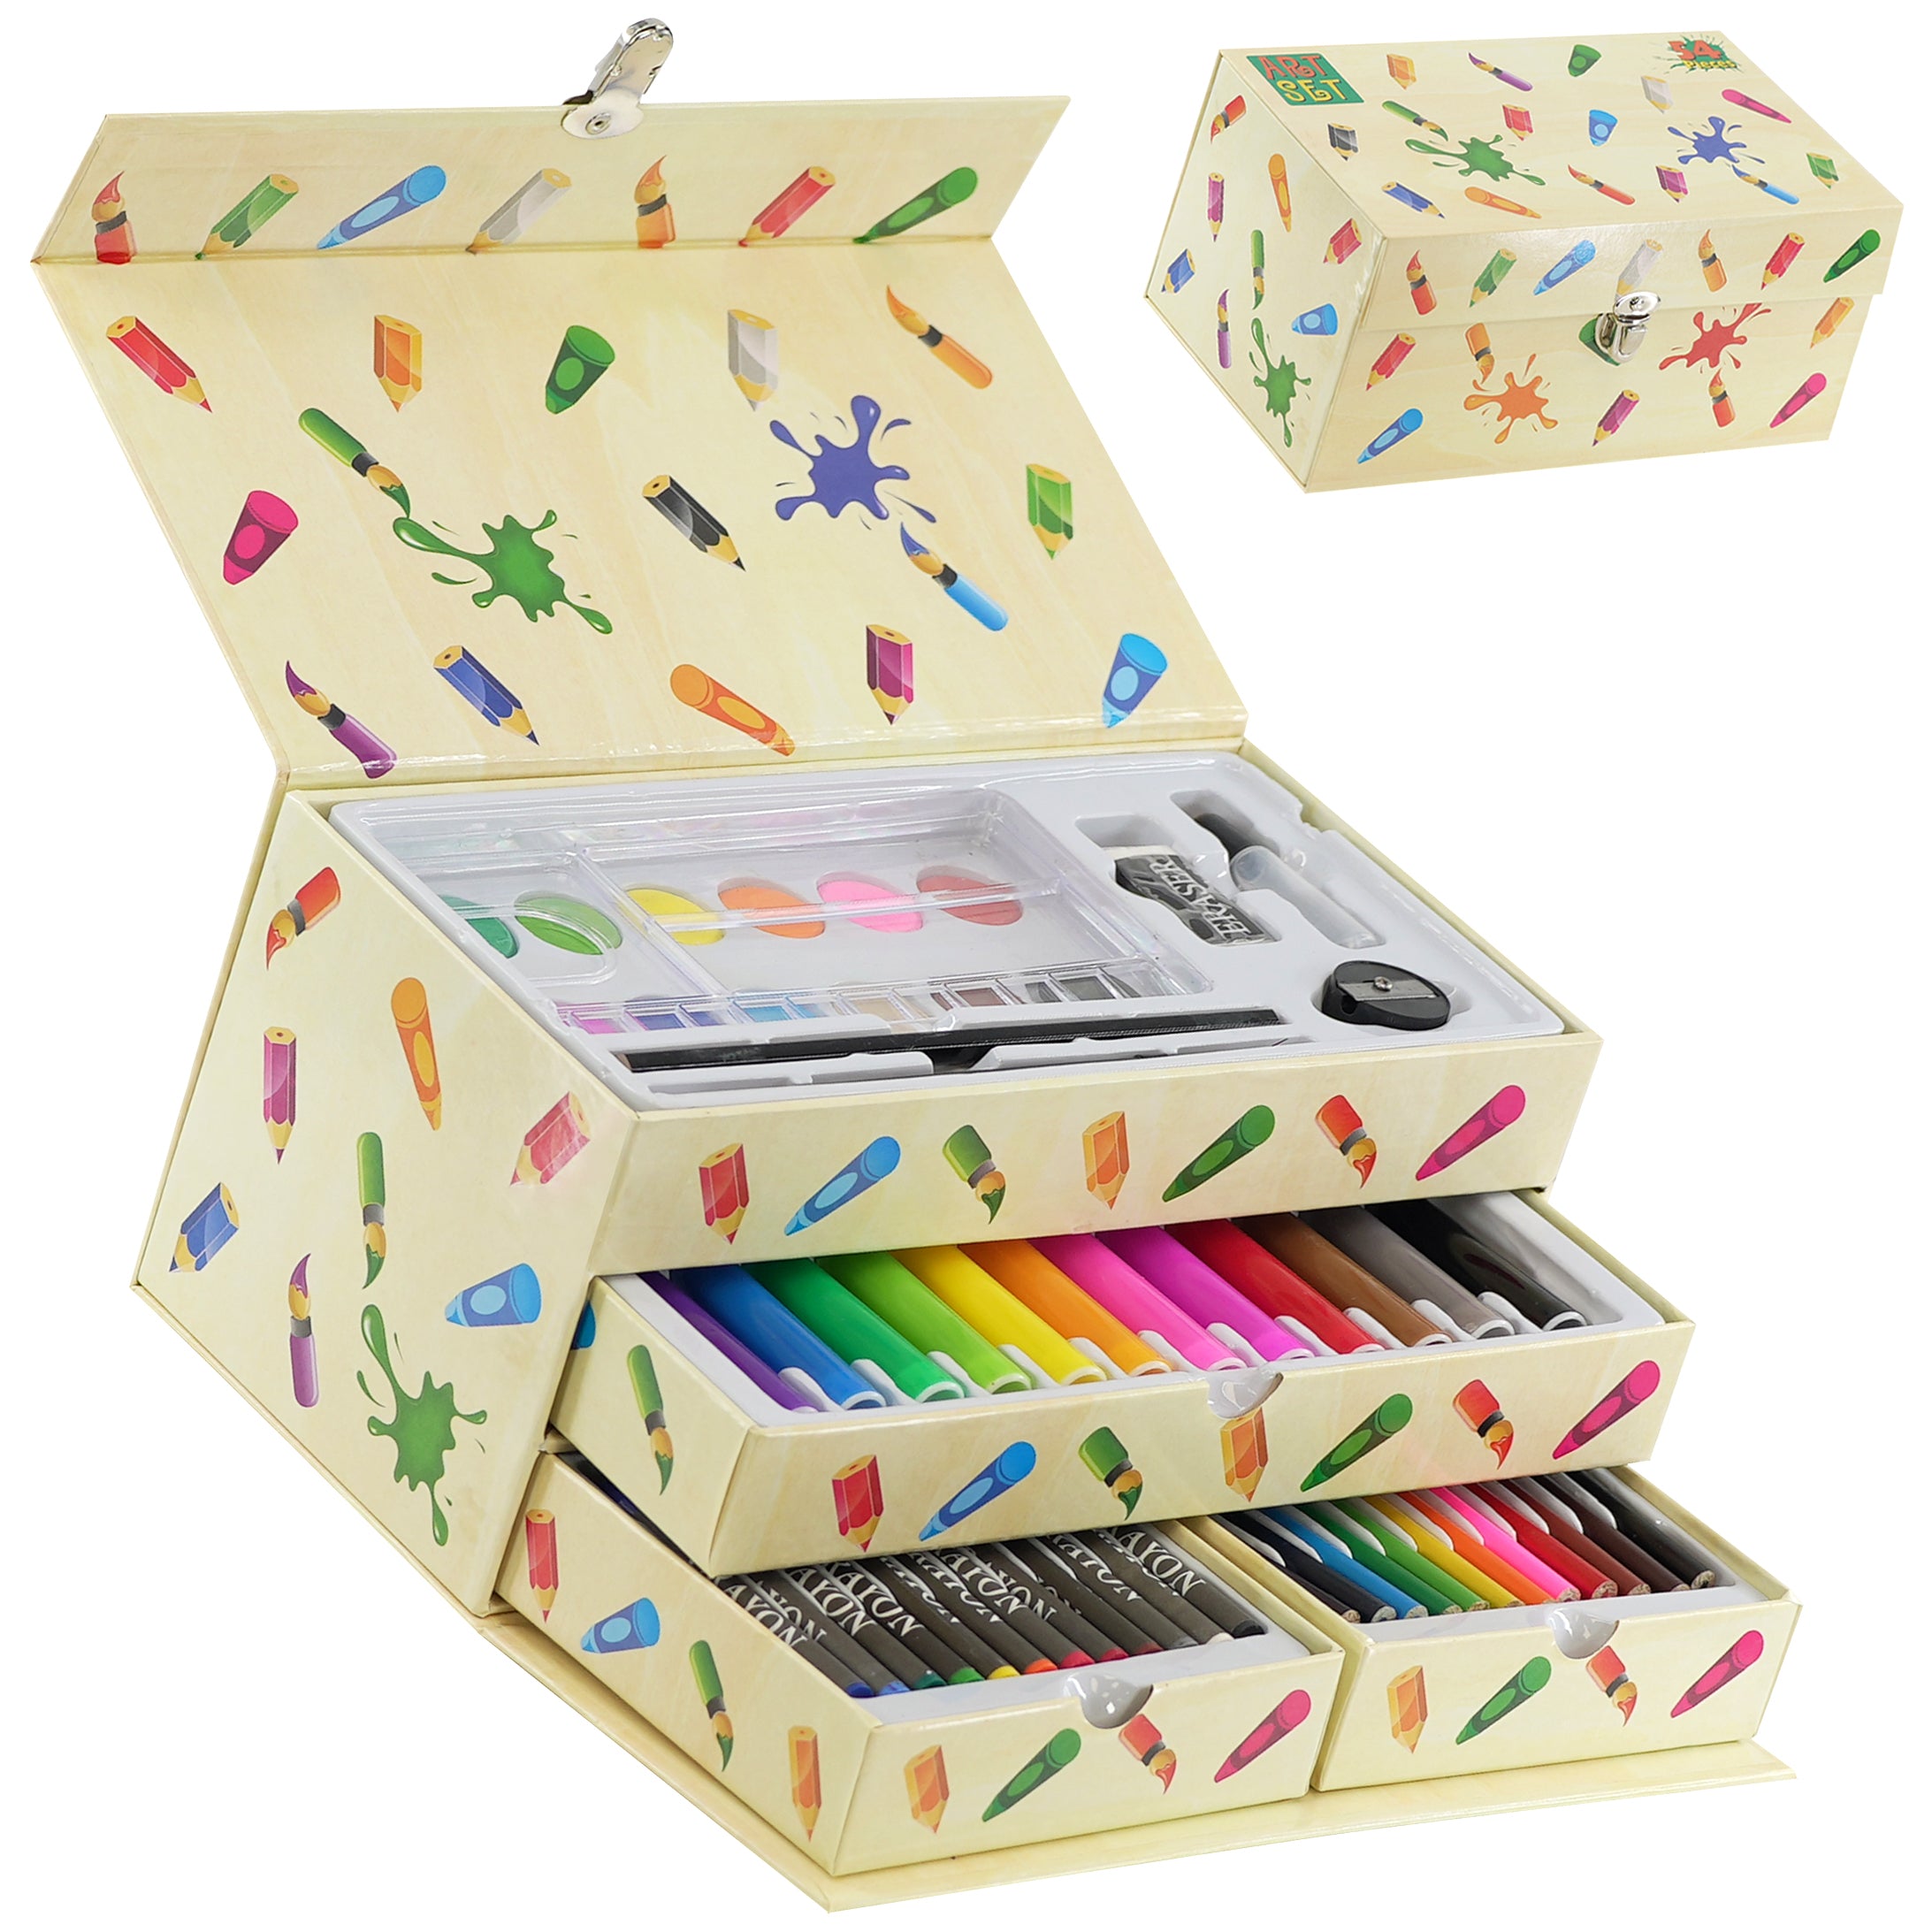 http://themagictoyshop.co.uk/cdn/shop/files/the-magic-toy-shop-drawing-54-pieces-craft-art-set-in-a-box-39512952930526.jpg?v=1701973671